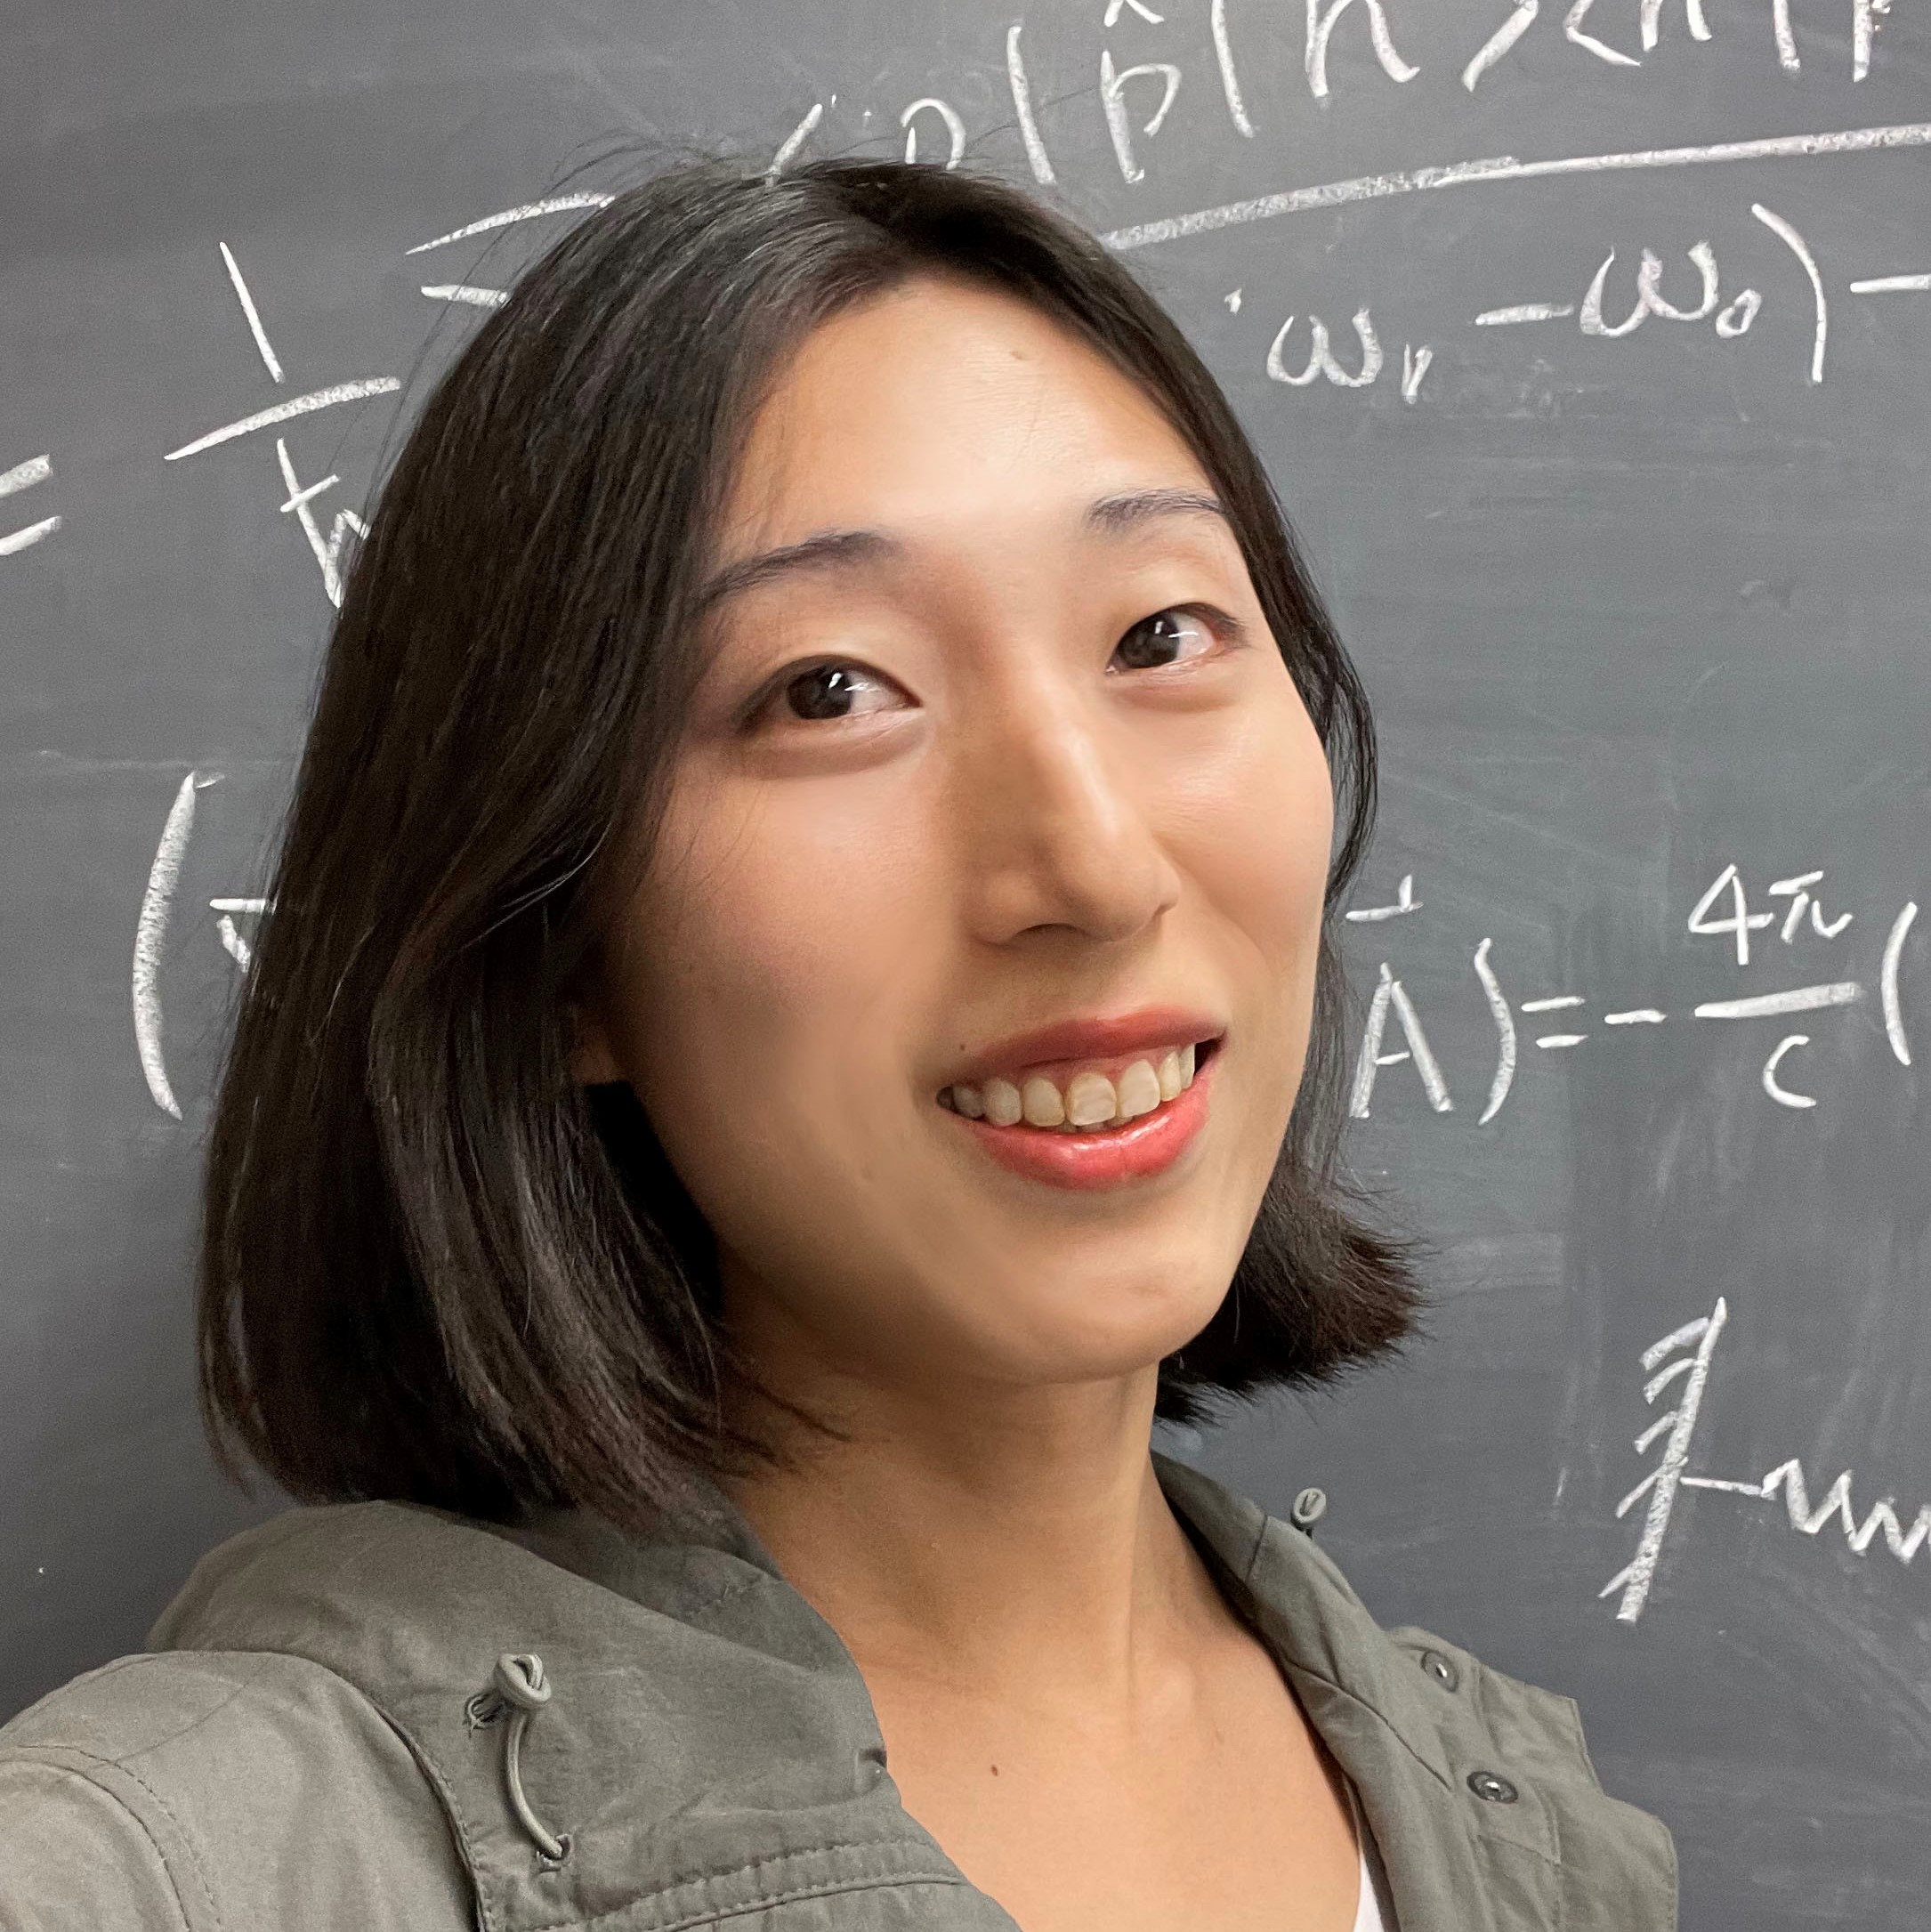 The image represents the headshot of Yuan Gao, a young adult with black hair. In the background one can see equations written on a chalkboard